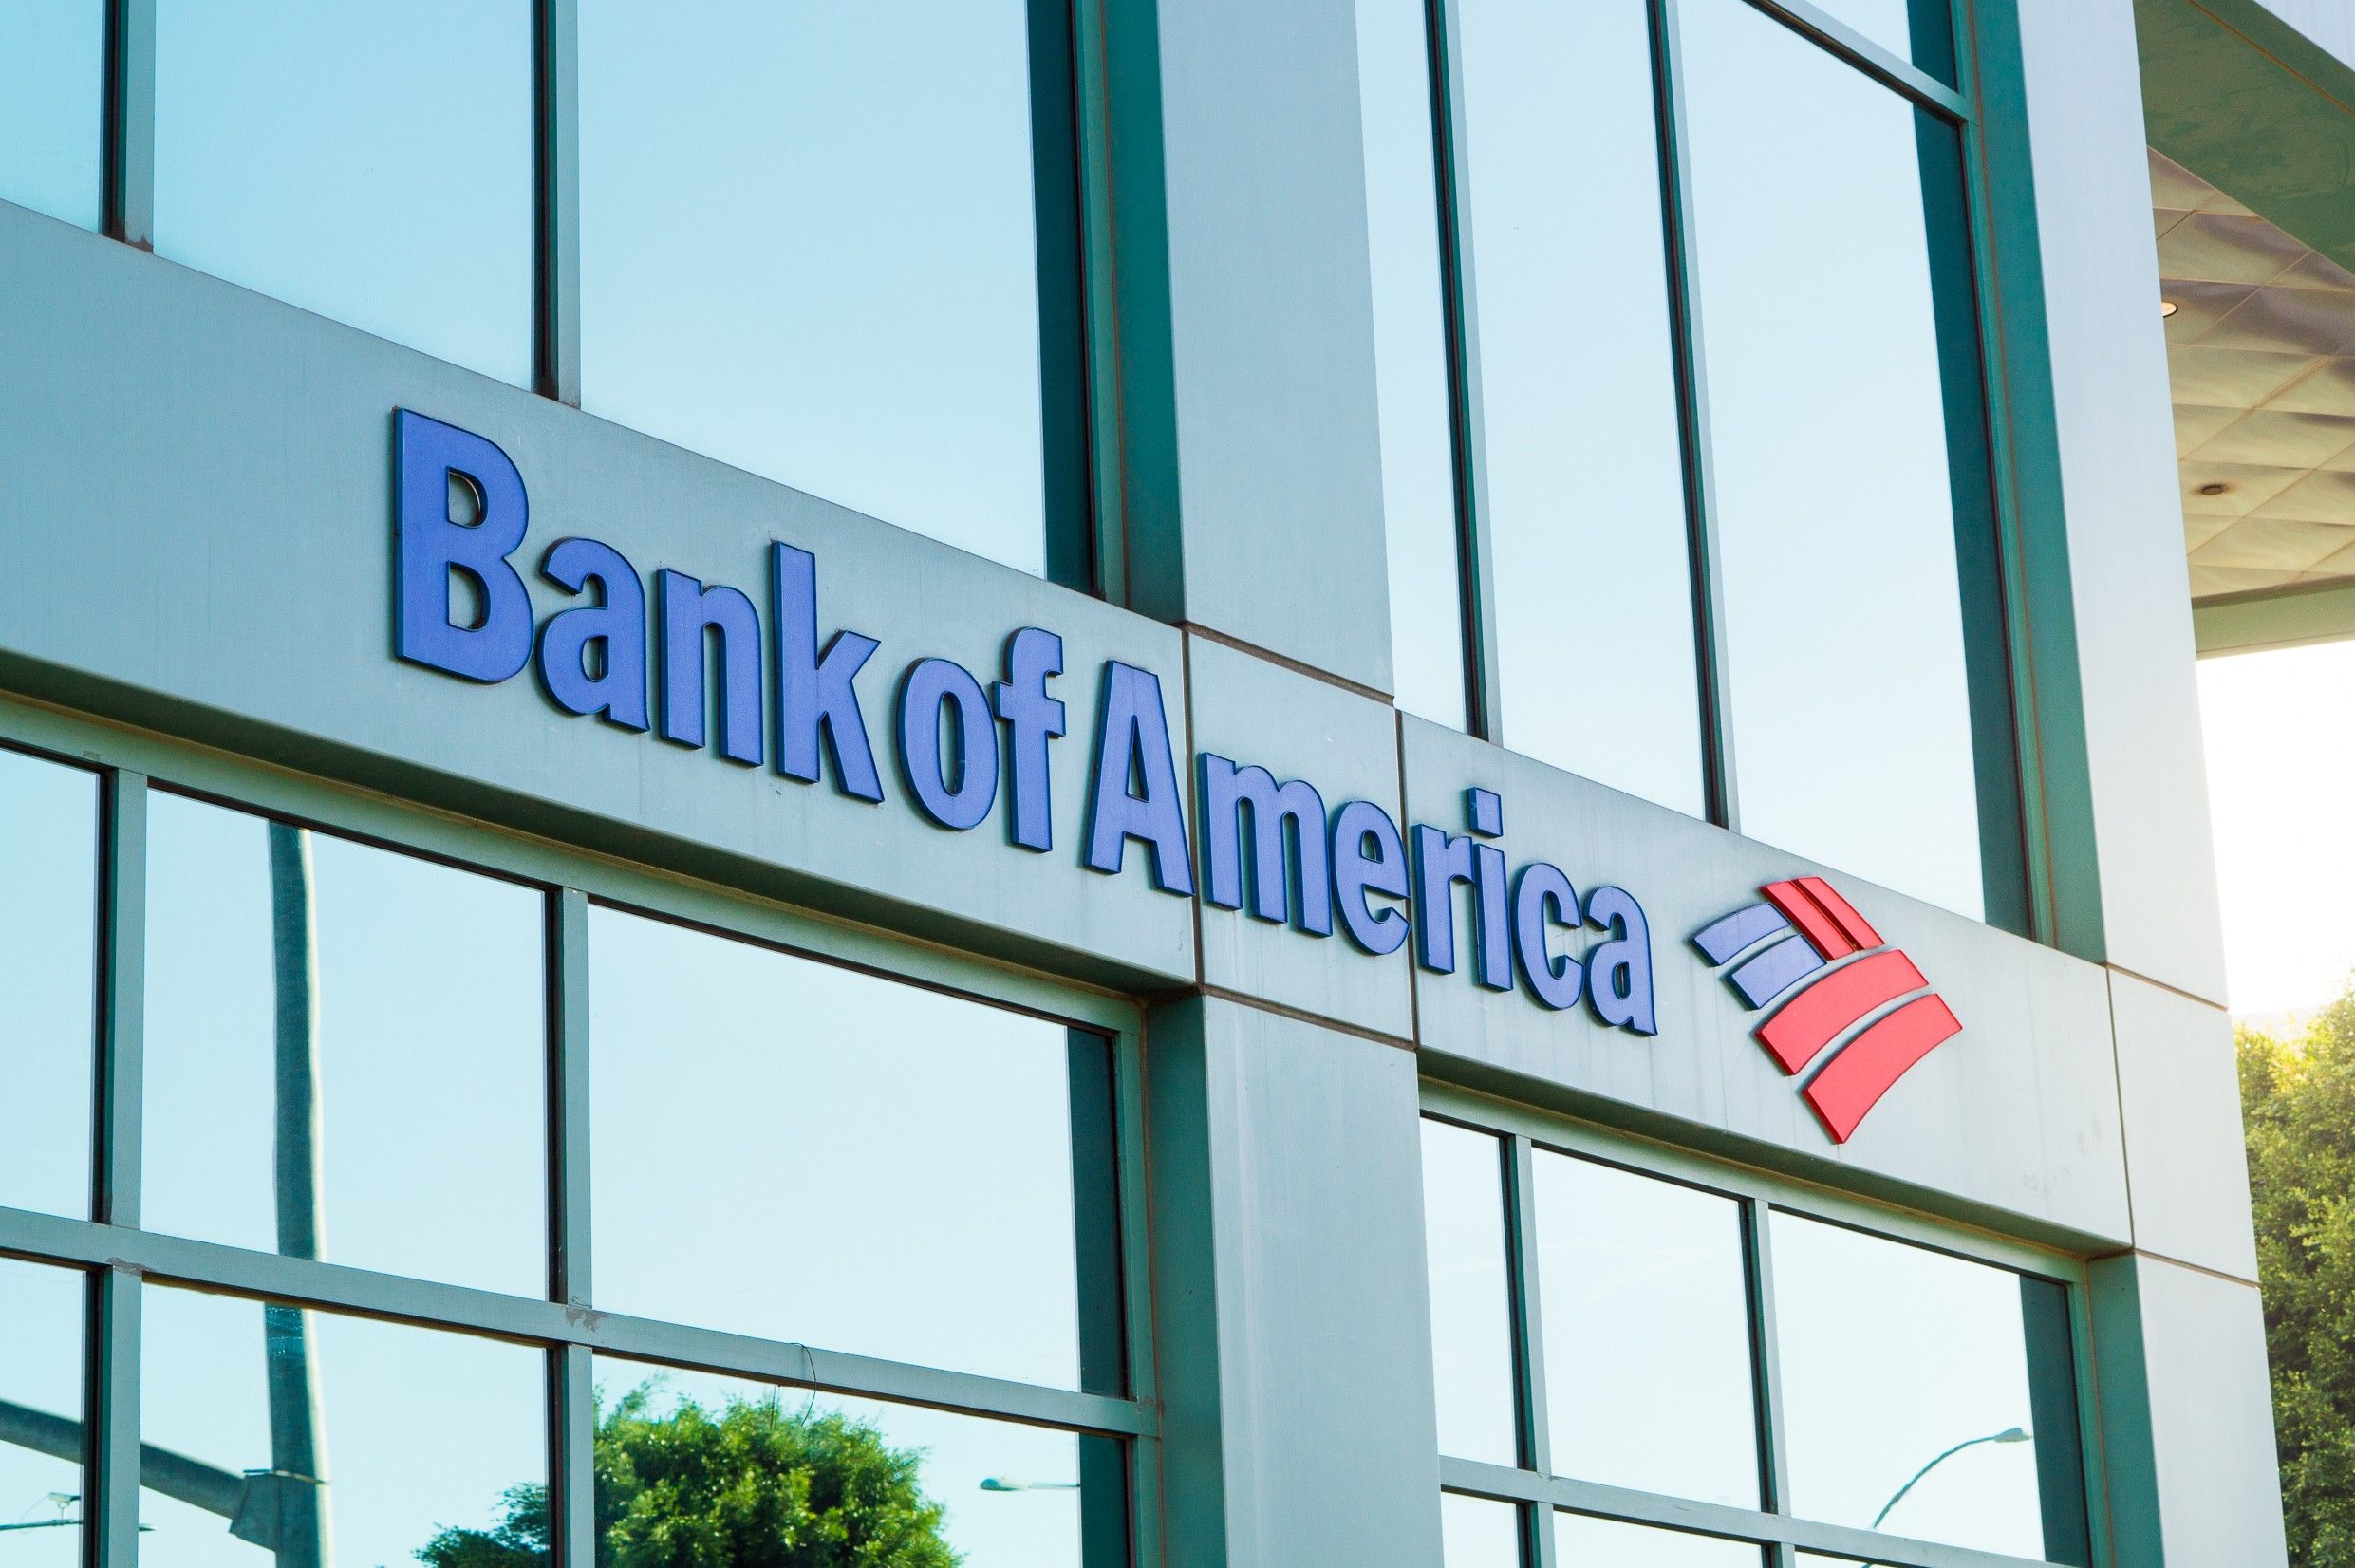 Bank of America overdraft fee class action settled for $8M - Top ...